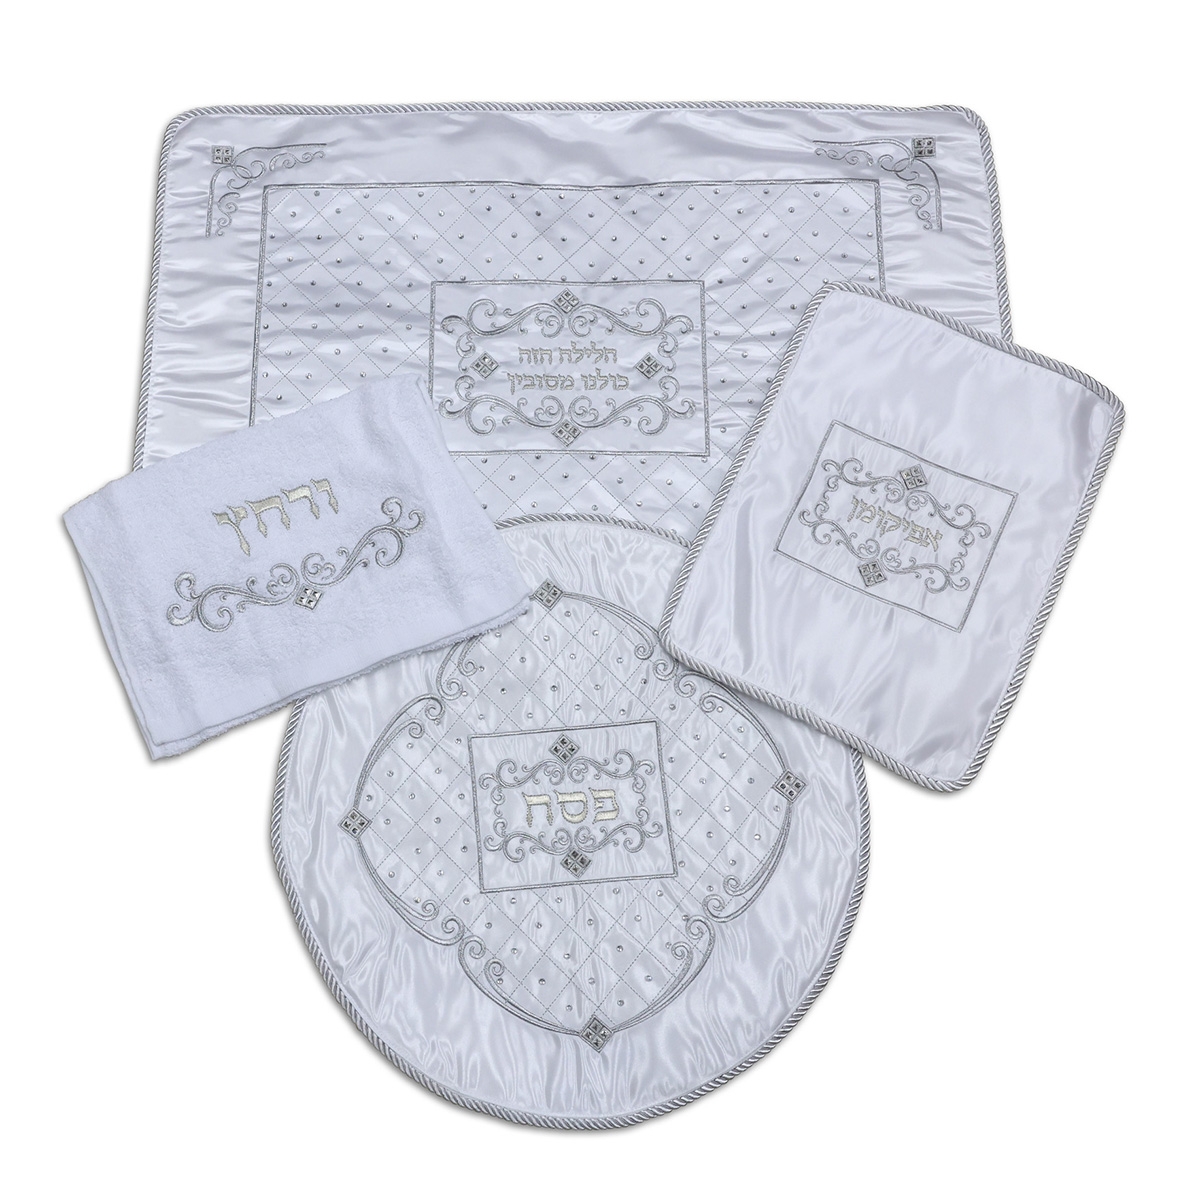 Stunning Passover Cover Set with Netilat Yadayim Towel - 1